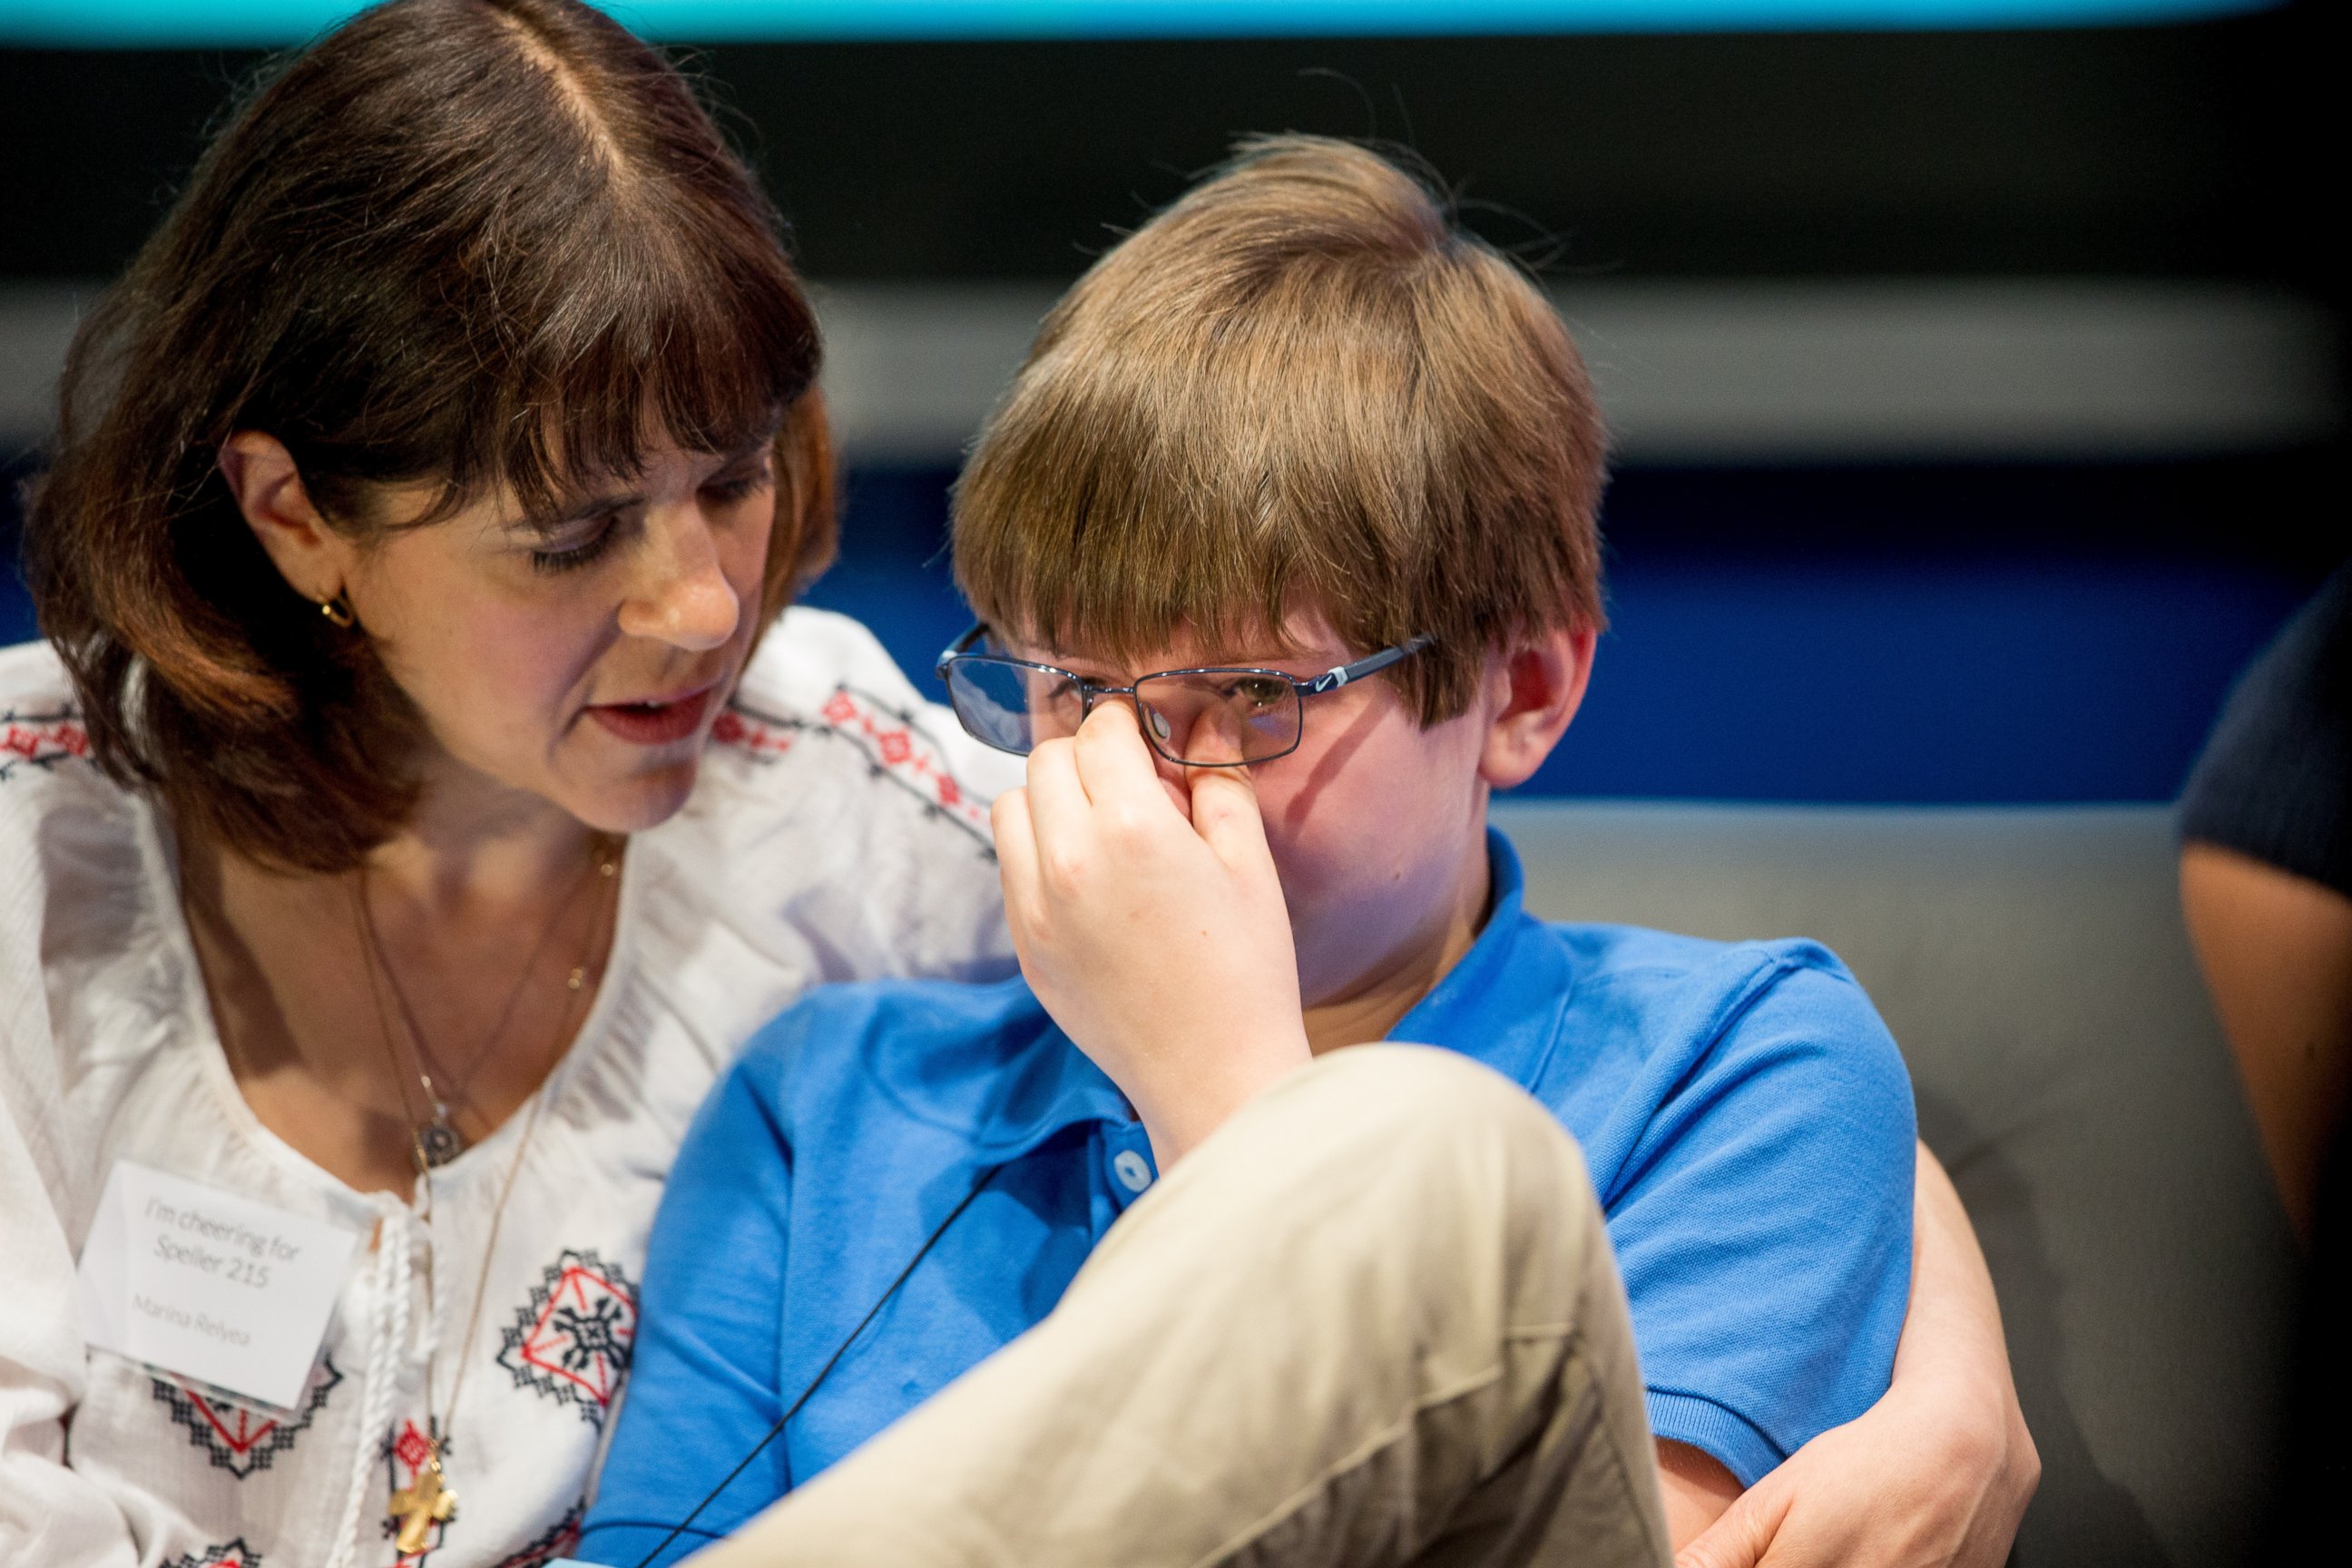 PHOTO: Christopher Relyea, 12, of Cumberland, R.I. is comforted by his mother Marina Relyea after incorrectly spelling "vexillology" during the preliminaries of the Scripps National Spelling Bee,, May 27, 2015, at National Harbor in Oxon Hill, Md. 